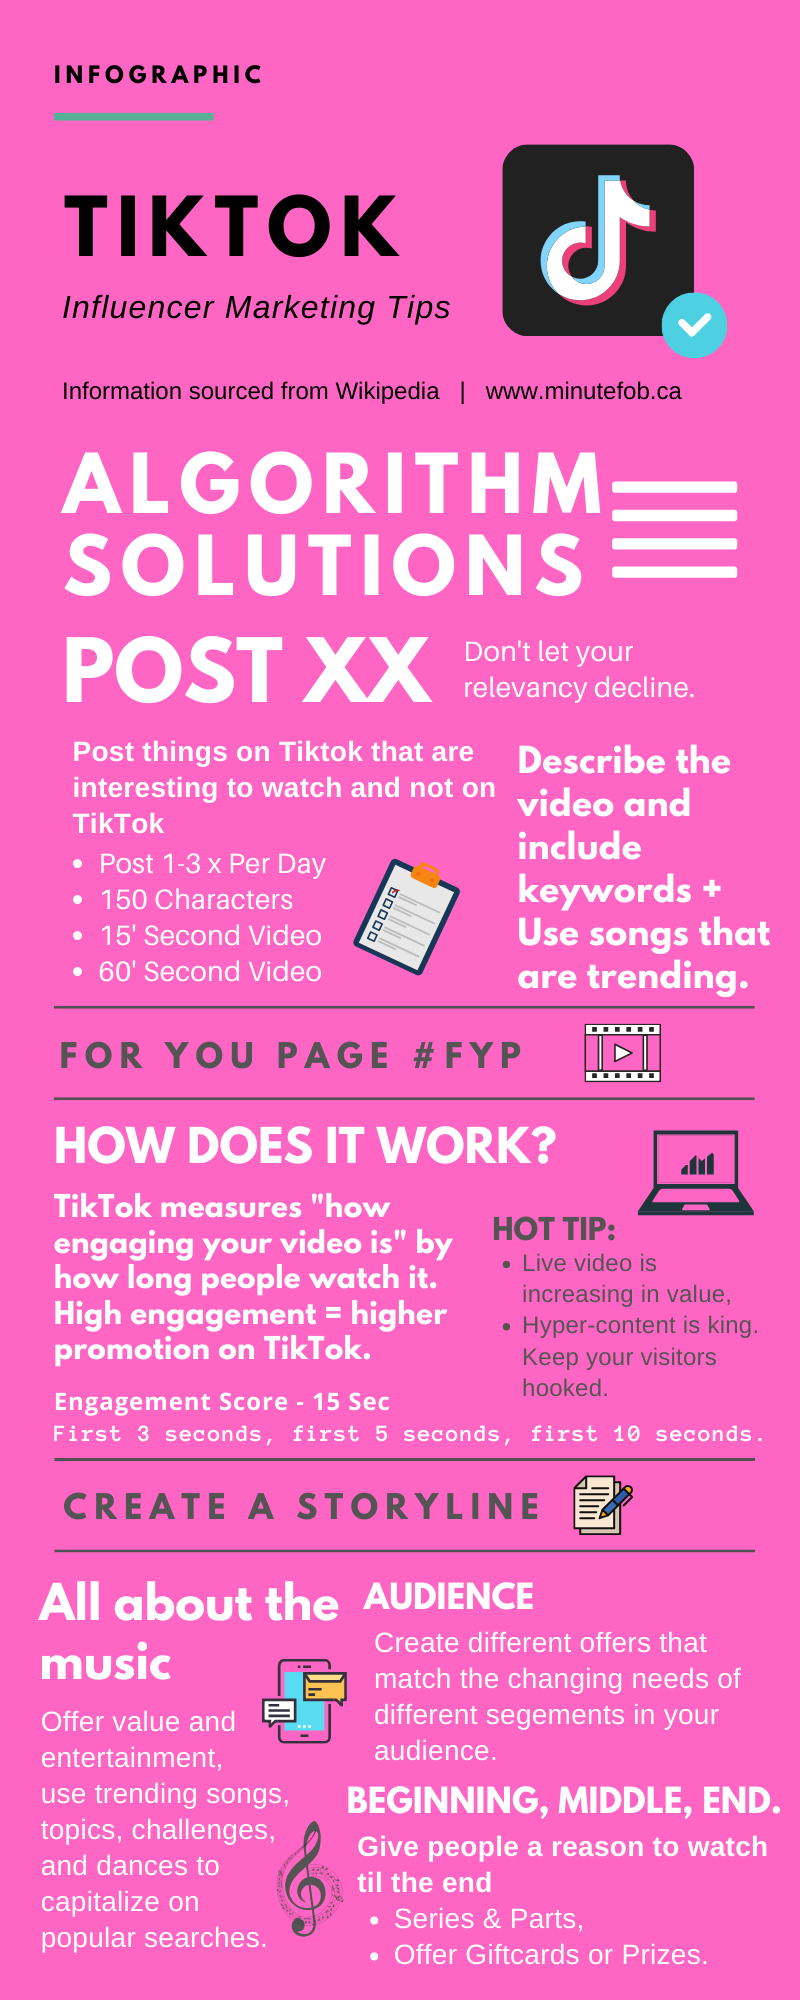 tik tok algorithm solutions post social media how does it work influencer marketing tips music video